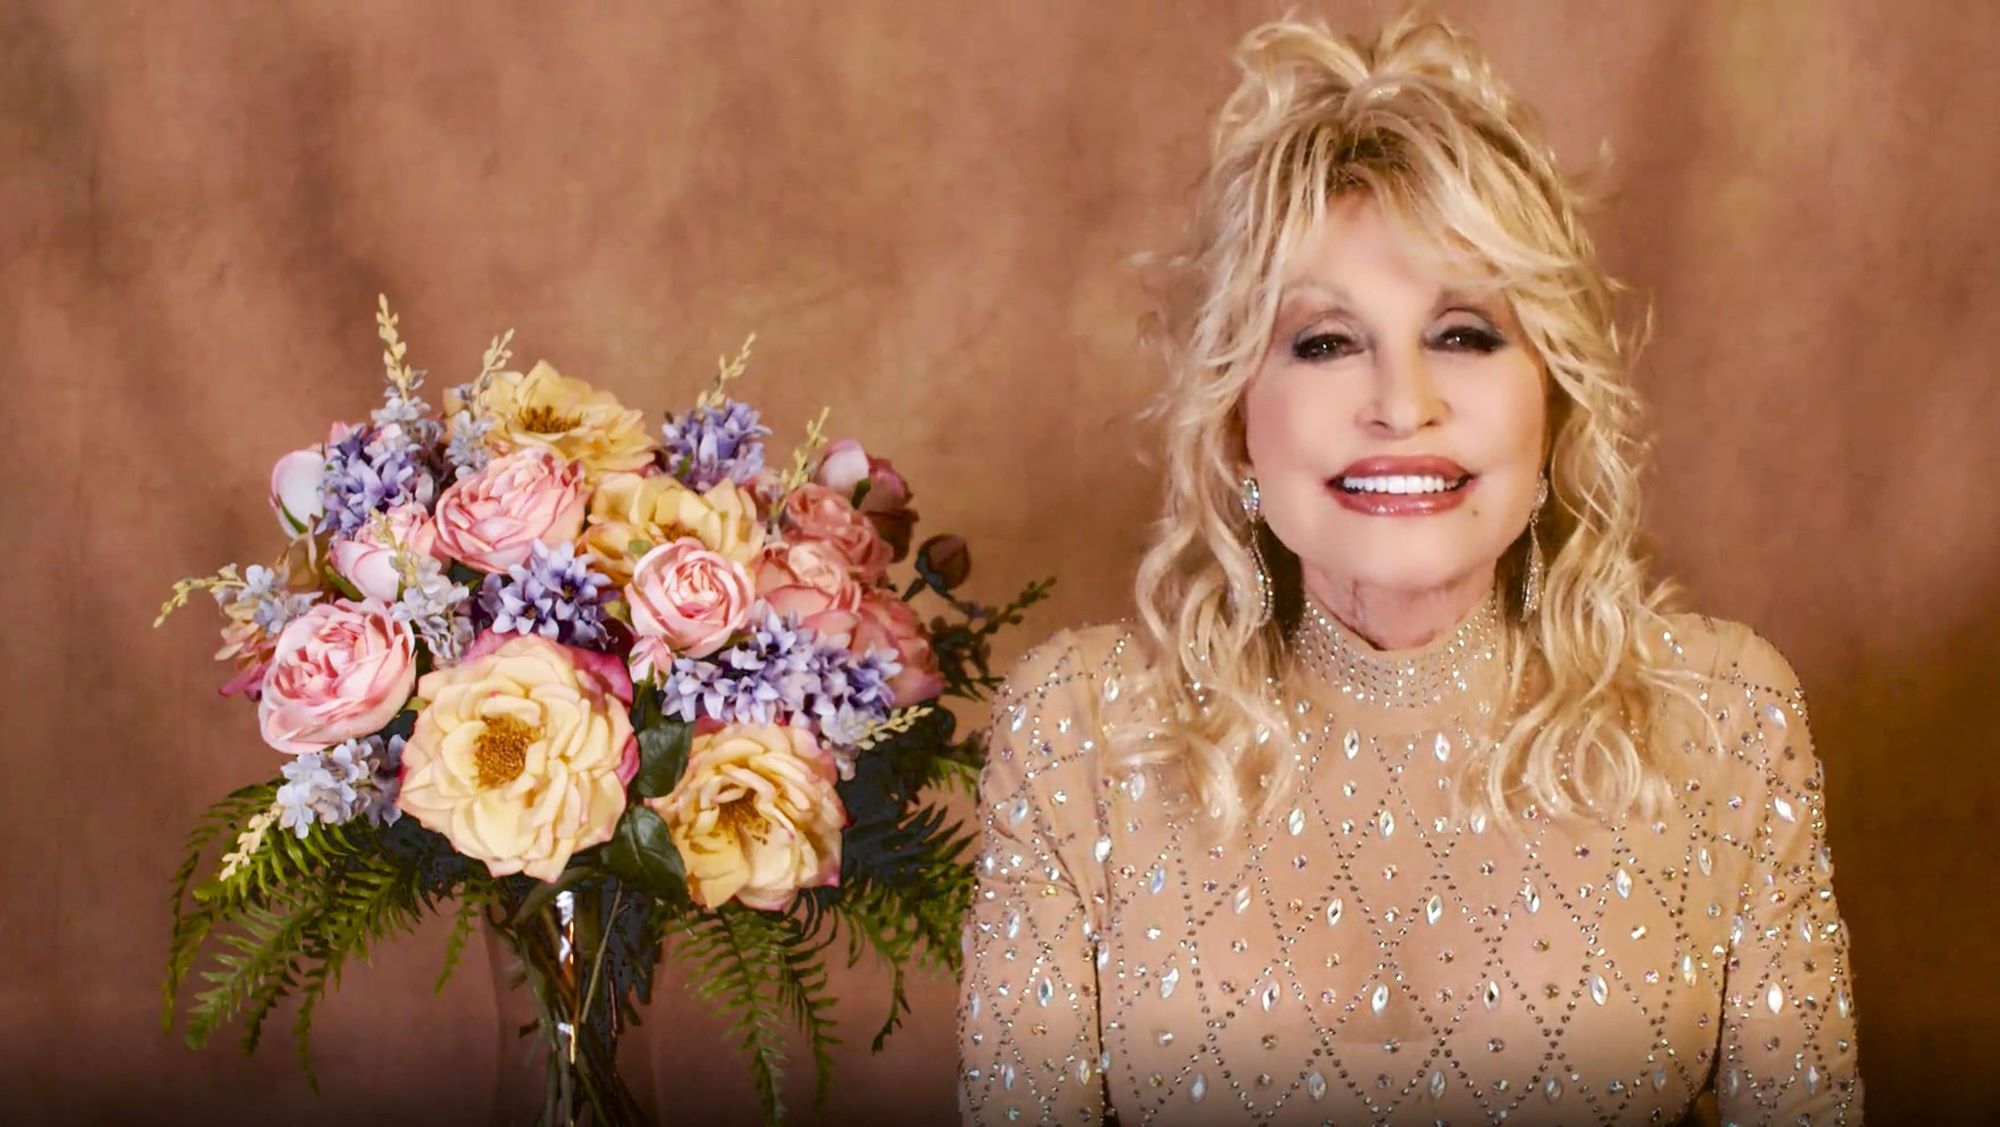 Dolly Parton during a speech at the 56th Academy of Country Music Awards